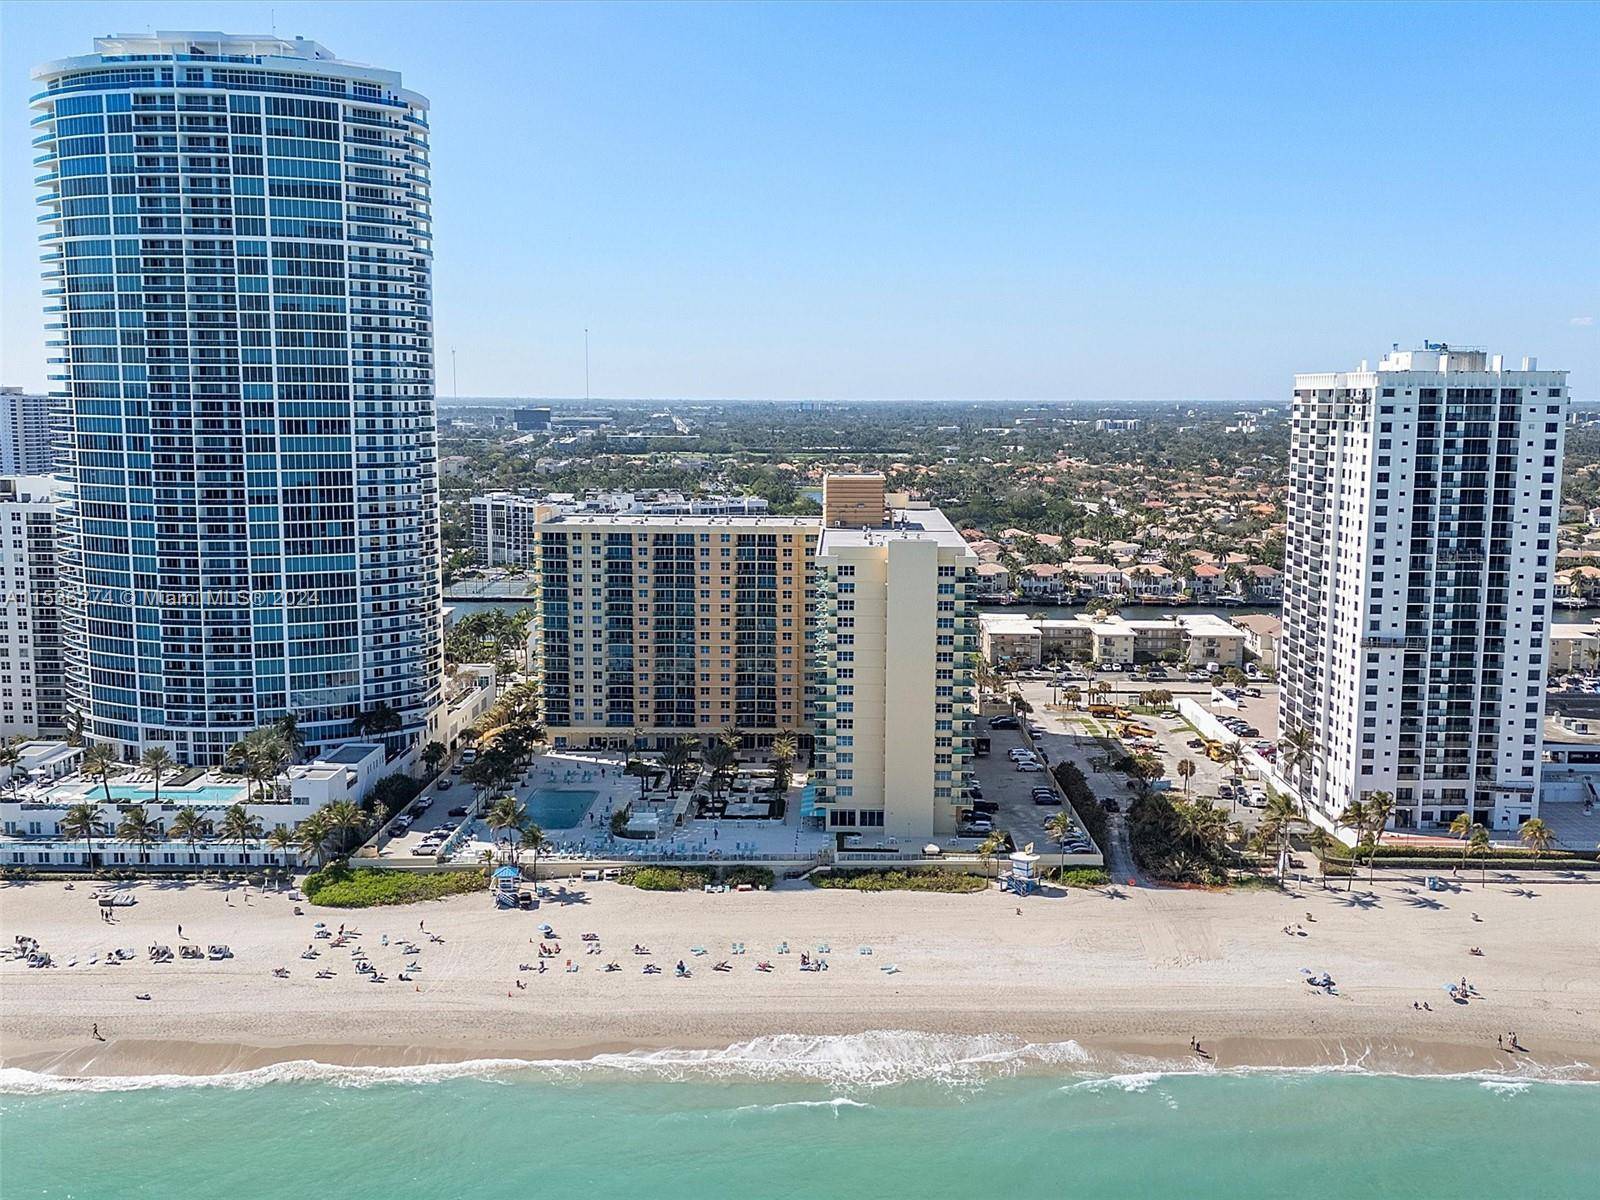 Amazing 1 Bedroom and 1 Bathroom apartment in the oceanfront condominium The Wave at Hollywood Beach with water view from living room and the bedroom.